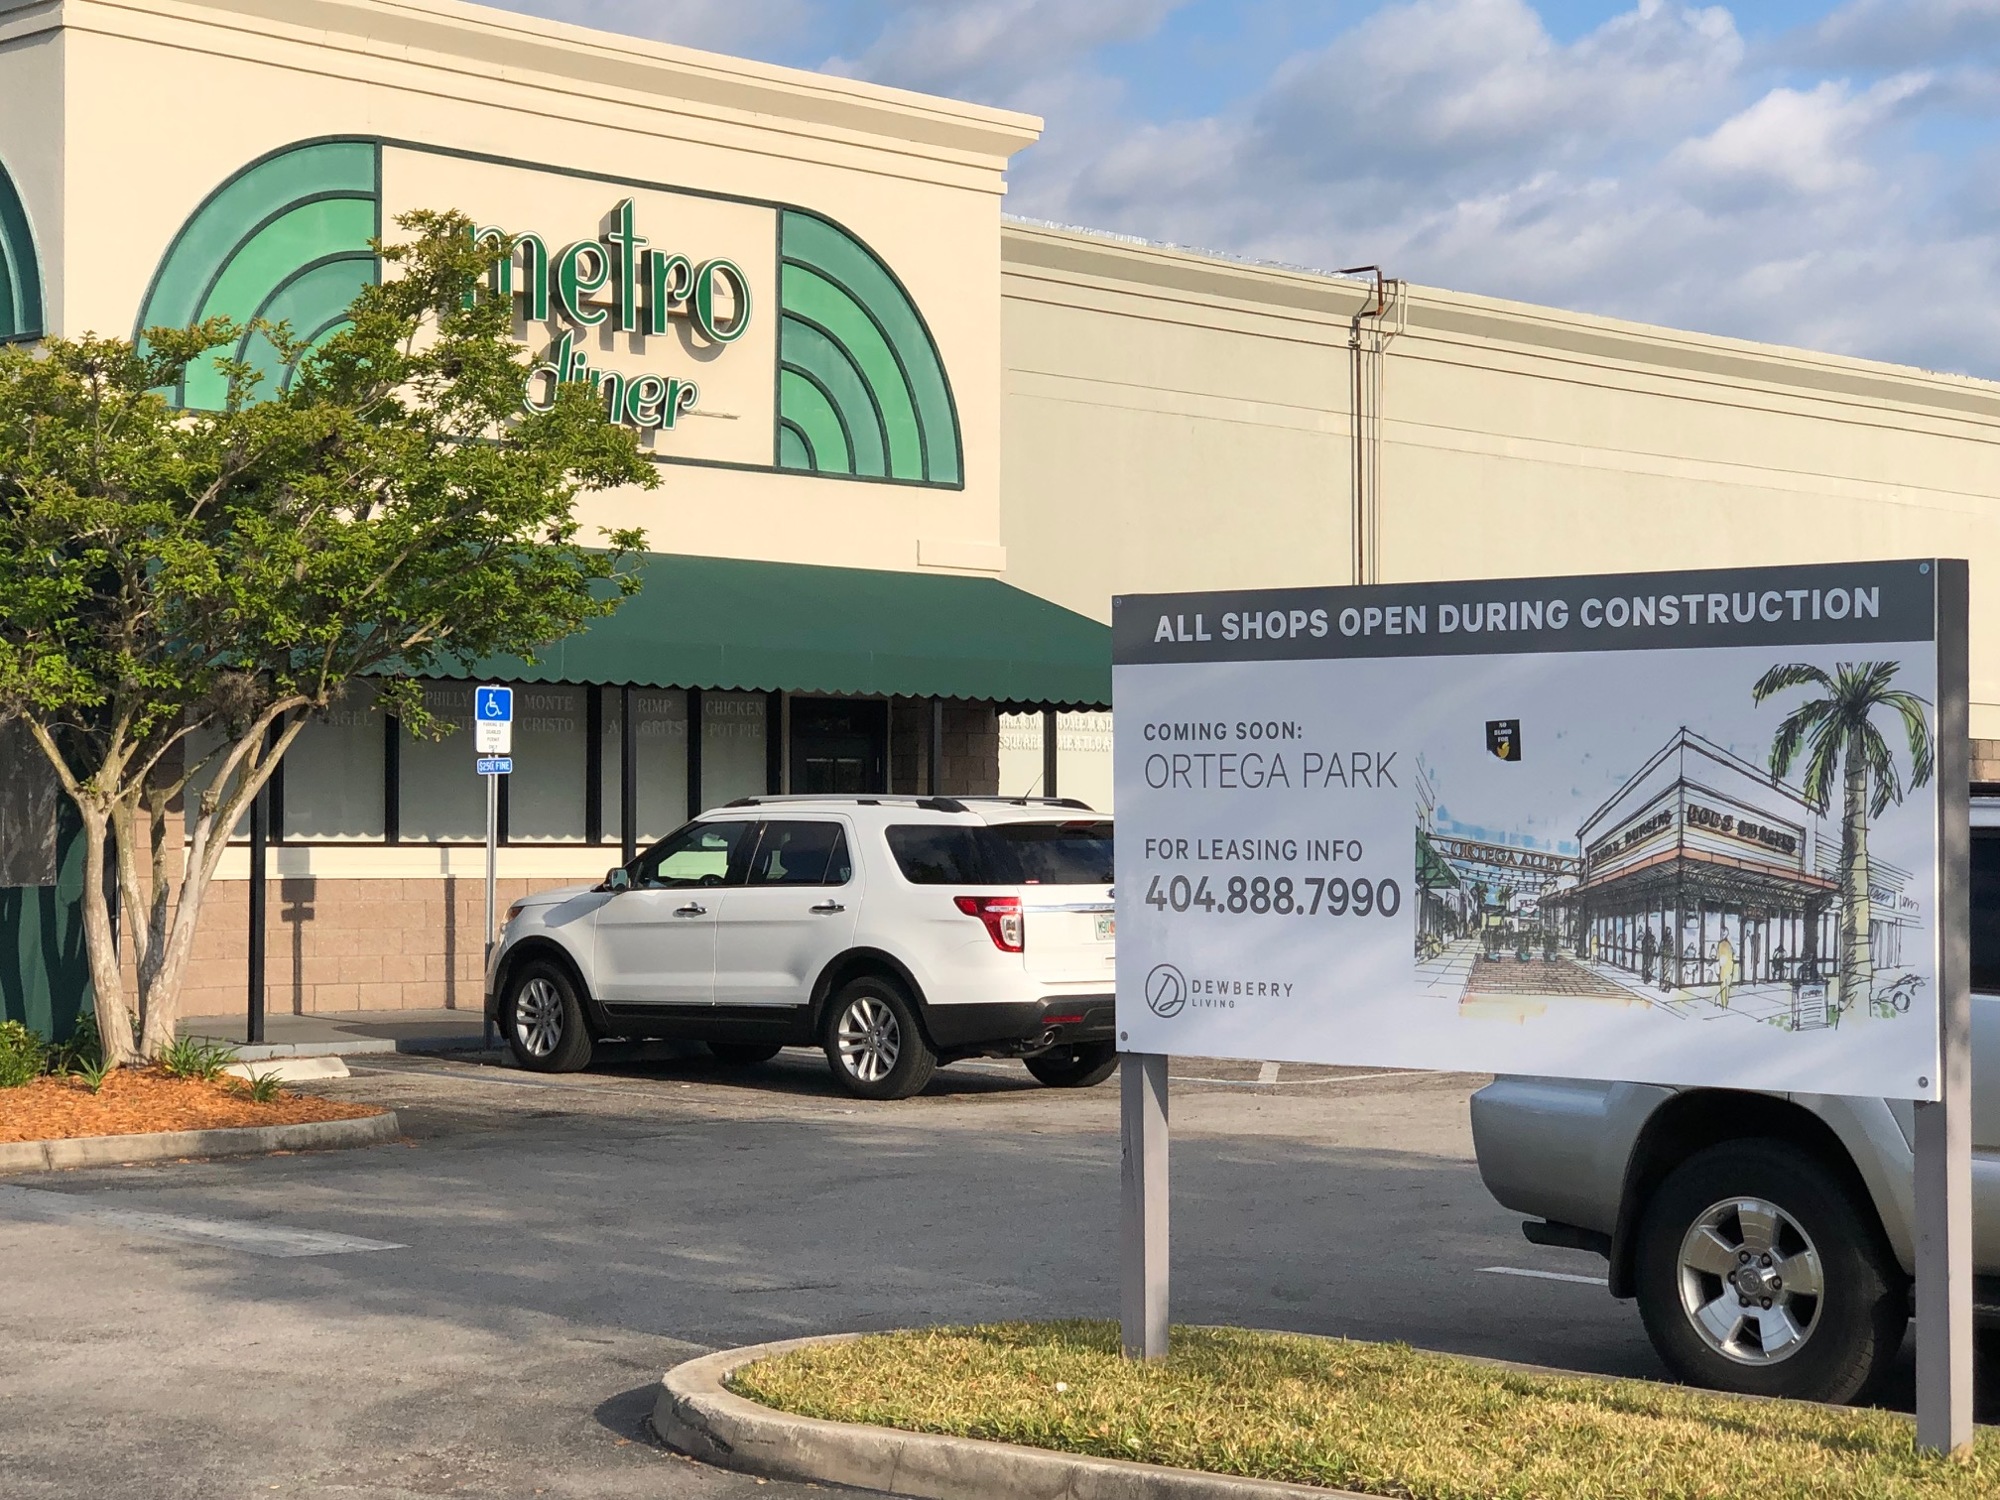 A sign and rendering shows how the area where Metro Diner will be located in the transformed Roosevelt Square. The shopping center is owned by the Atlanta-based Dewberry Group.